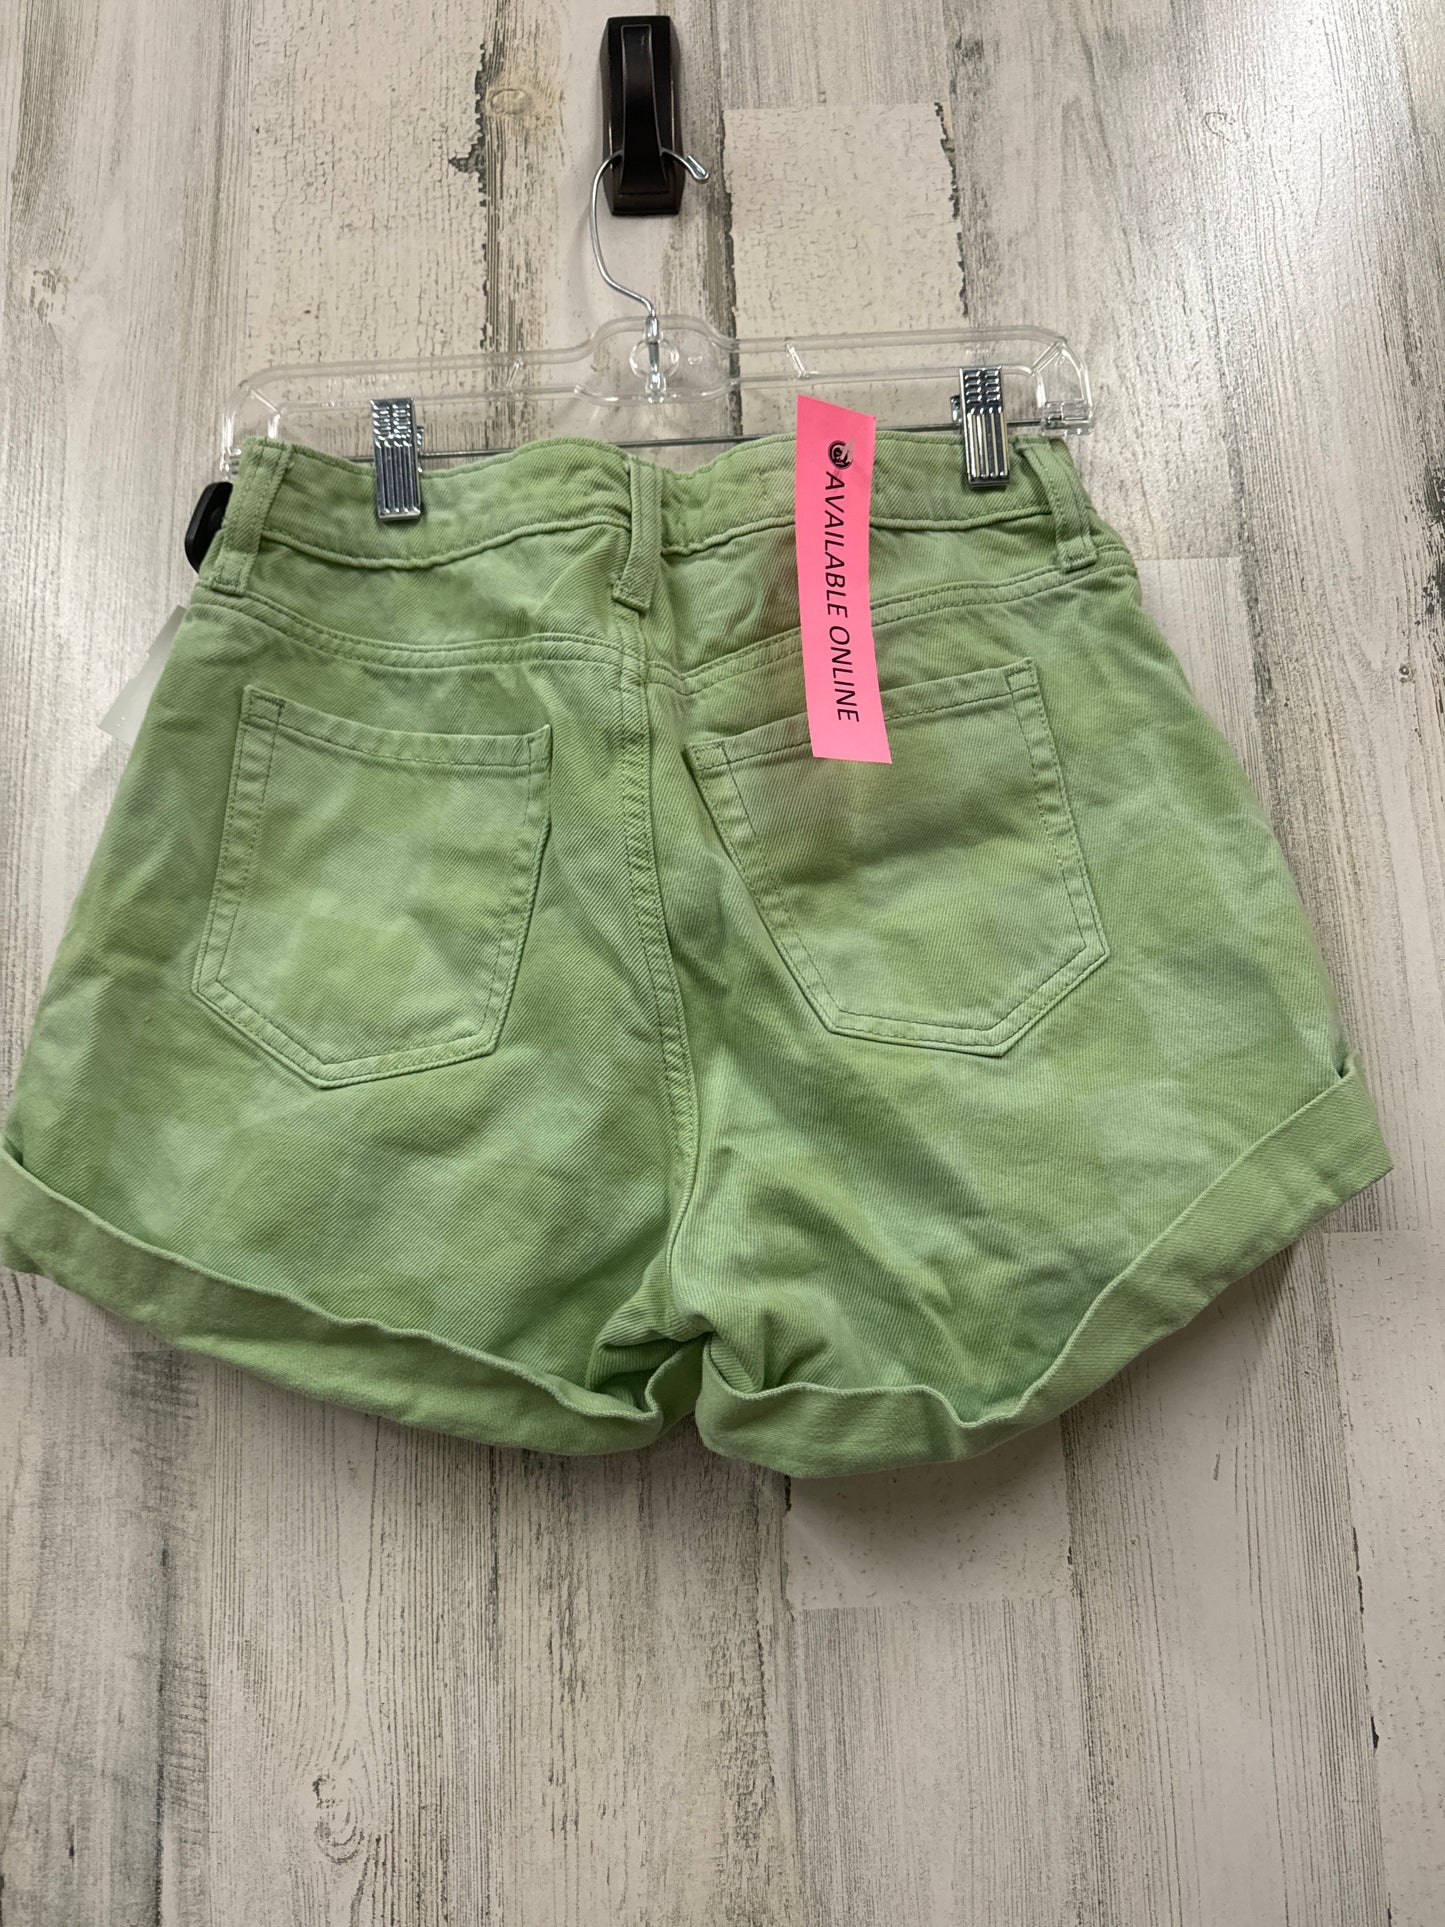 Green Shorts Wild Fable, Size 6